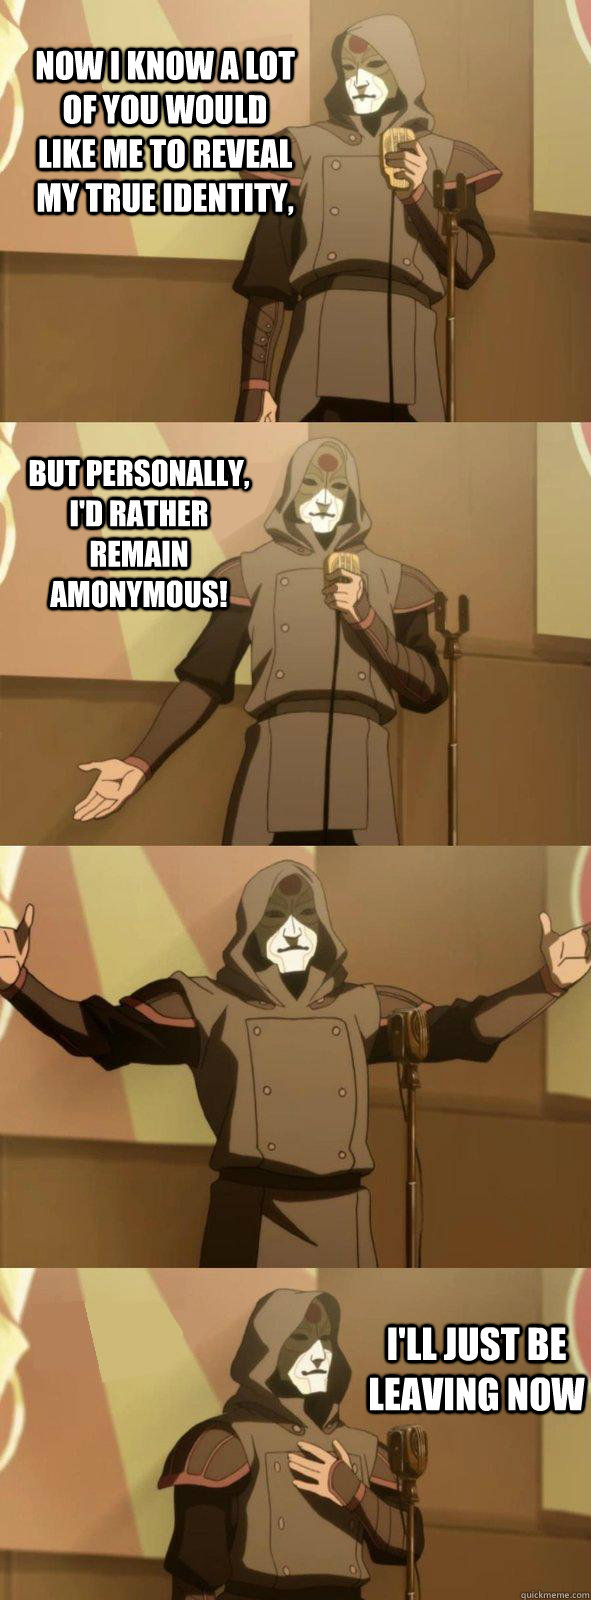 Now I know a lot of you would like me to reveal my true identity, I'll just be leaving now But personally, I'd rather remain amonymous!  Bad Joke Amon